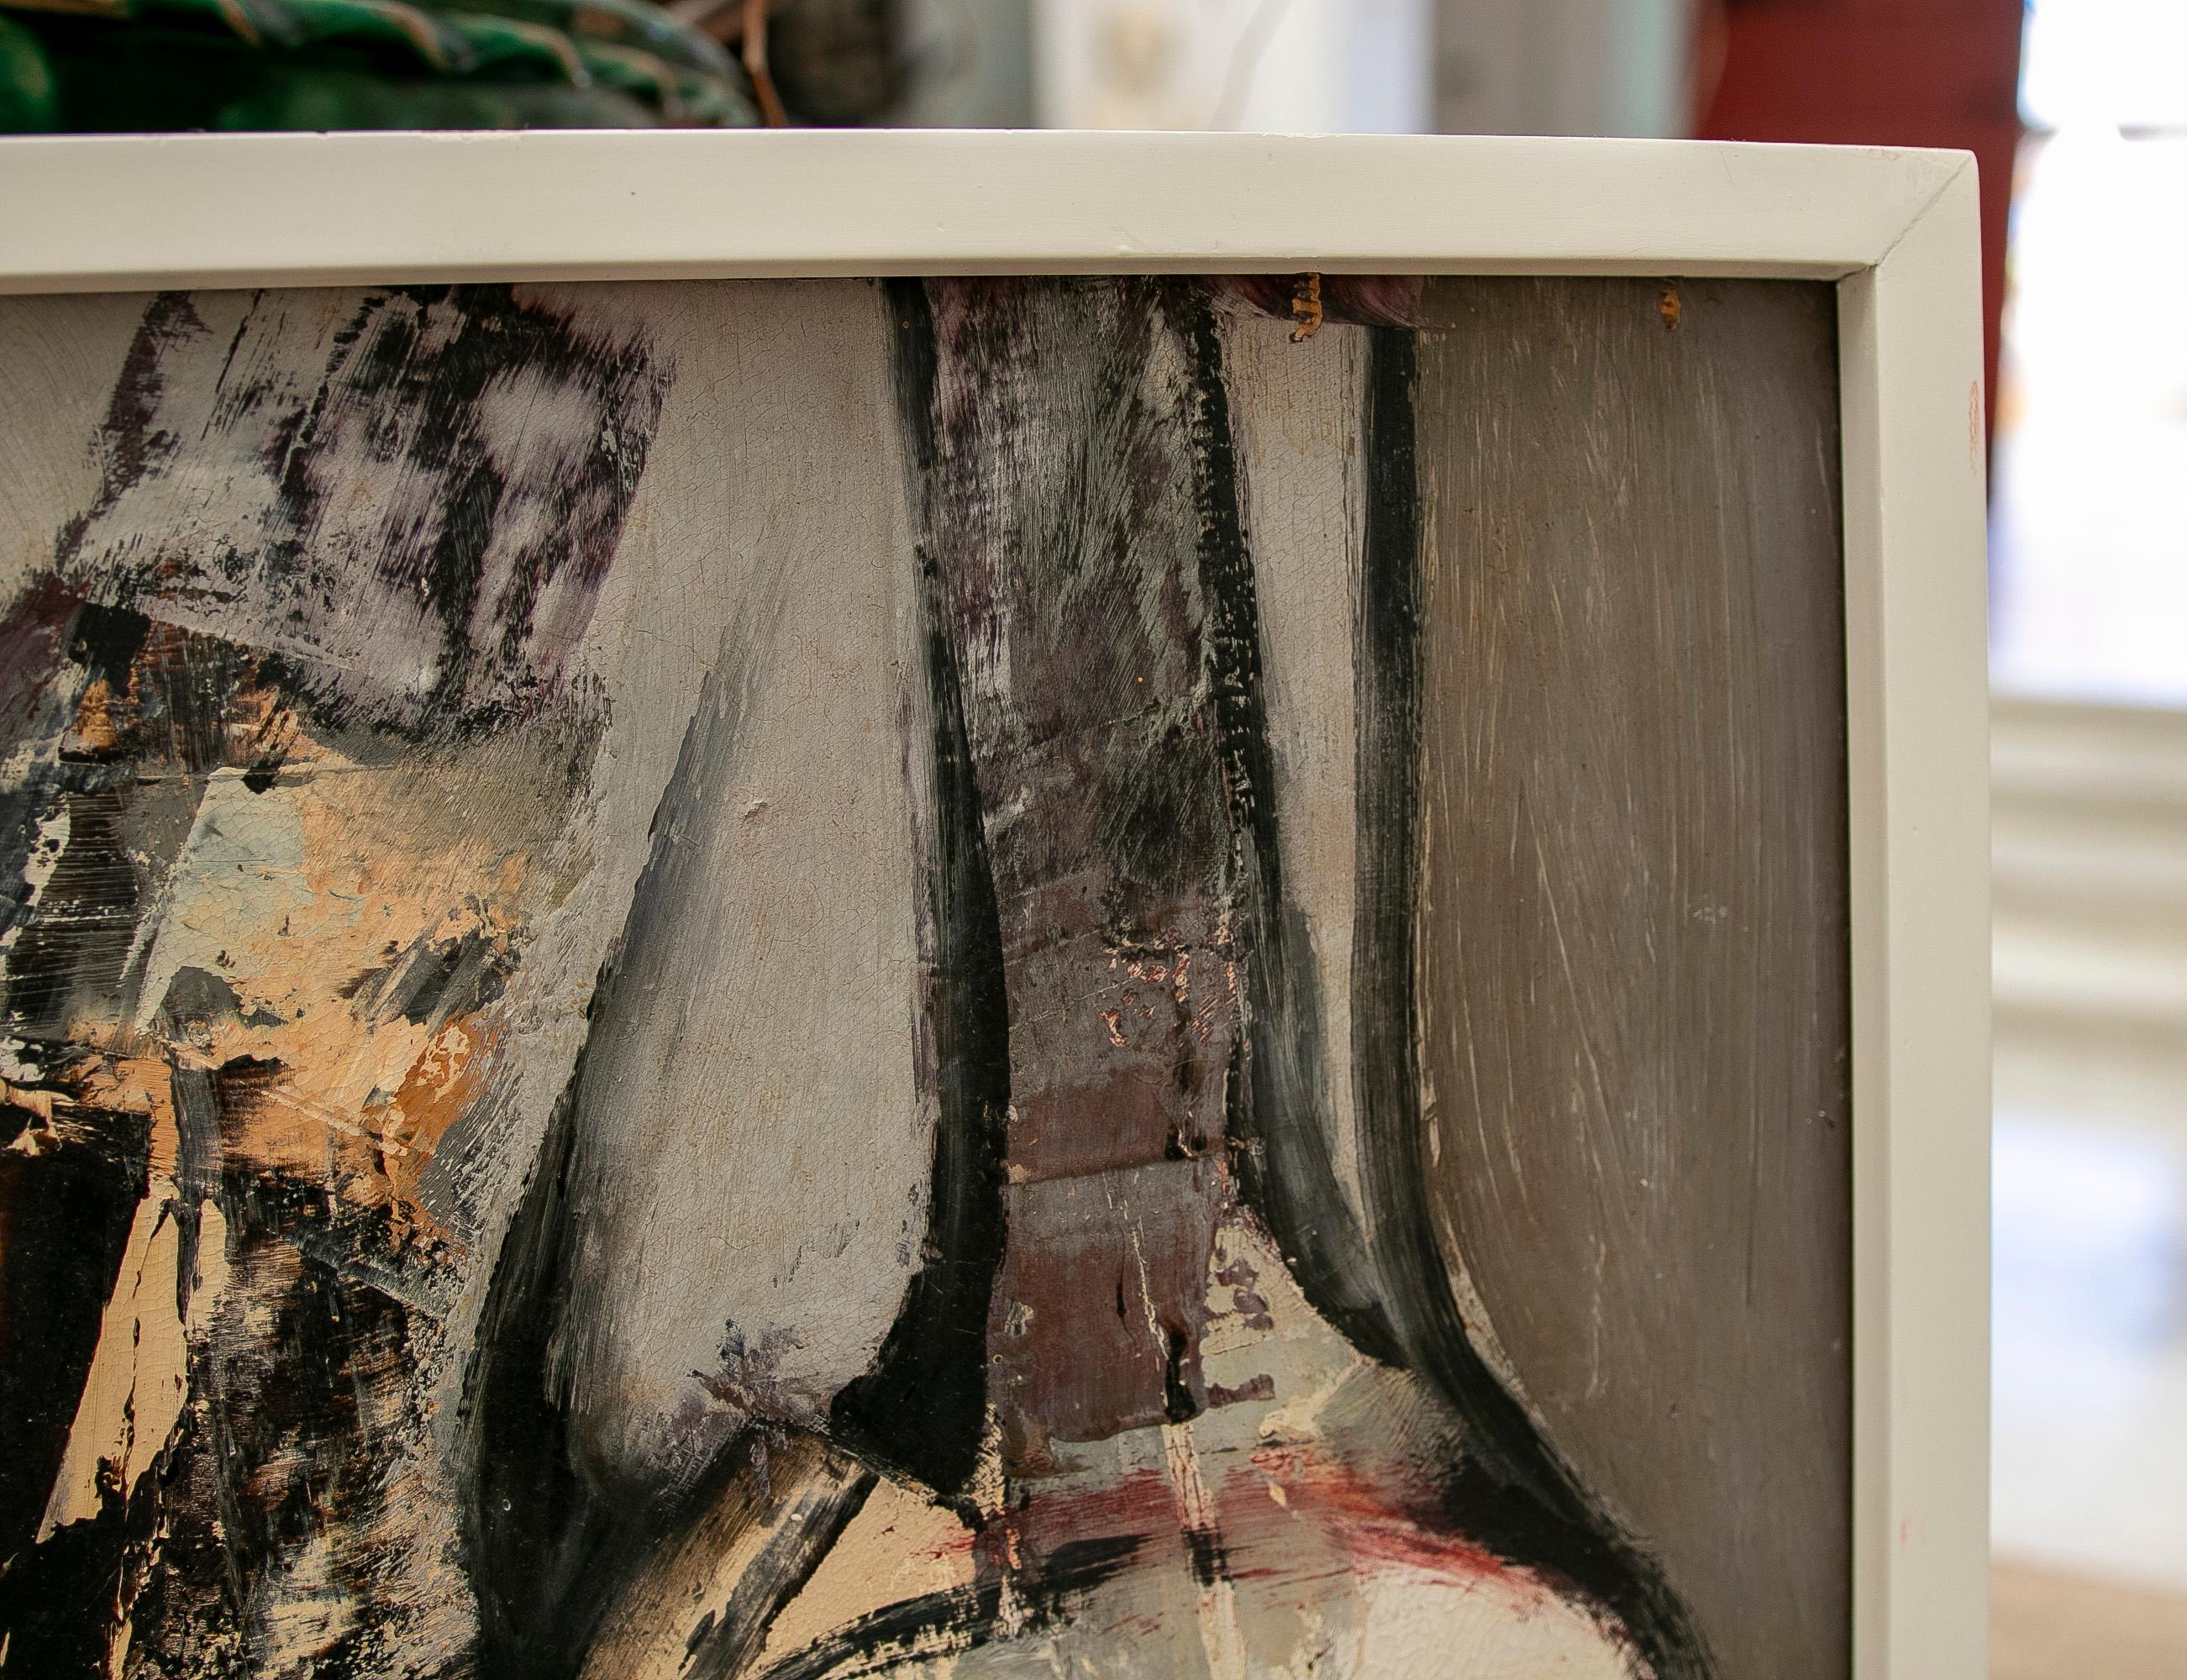 Abstract Painting by the Artist Abel Cuerda, Signed and Dated Year 1991
Measurements with frame: 52x67x4cm.